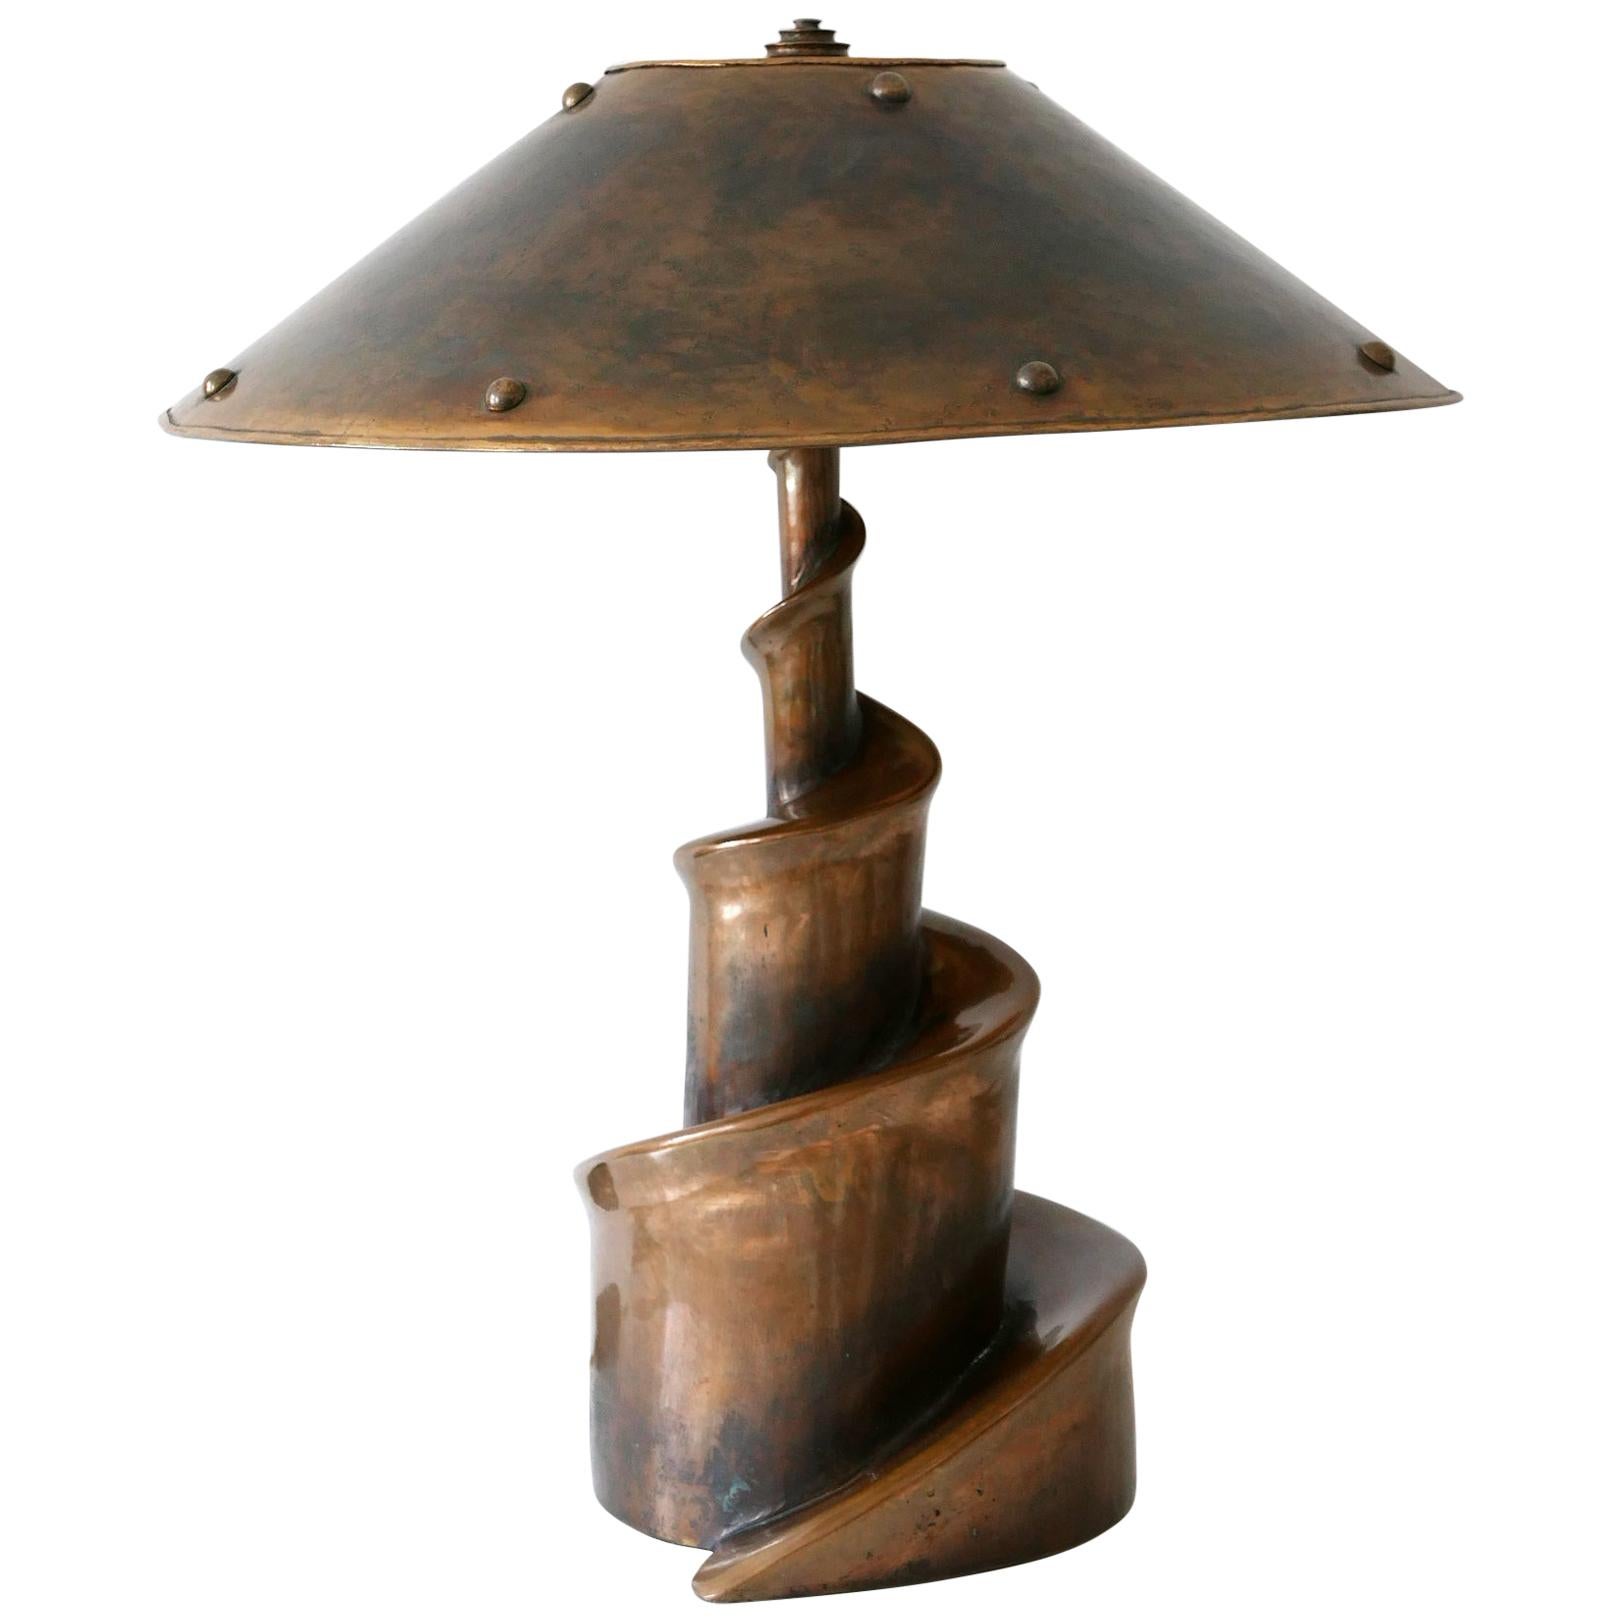 Unique and Monumental Brutalist Bronze Table Lamp or Floor Light, 1980s, Germany